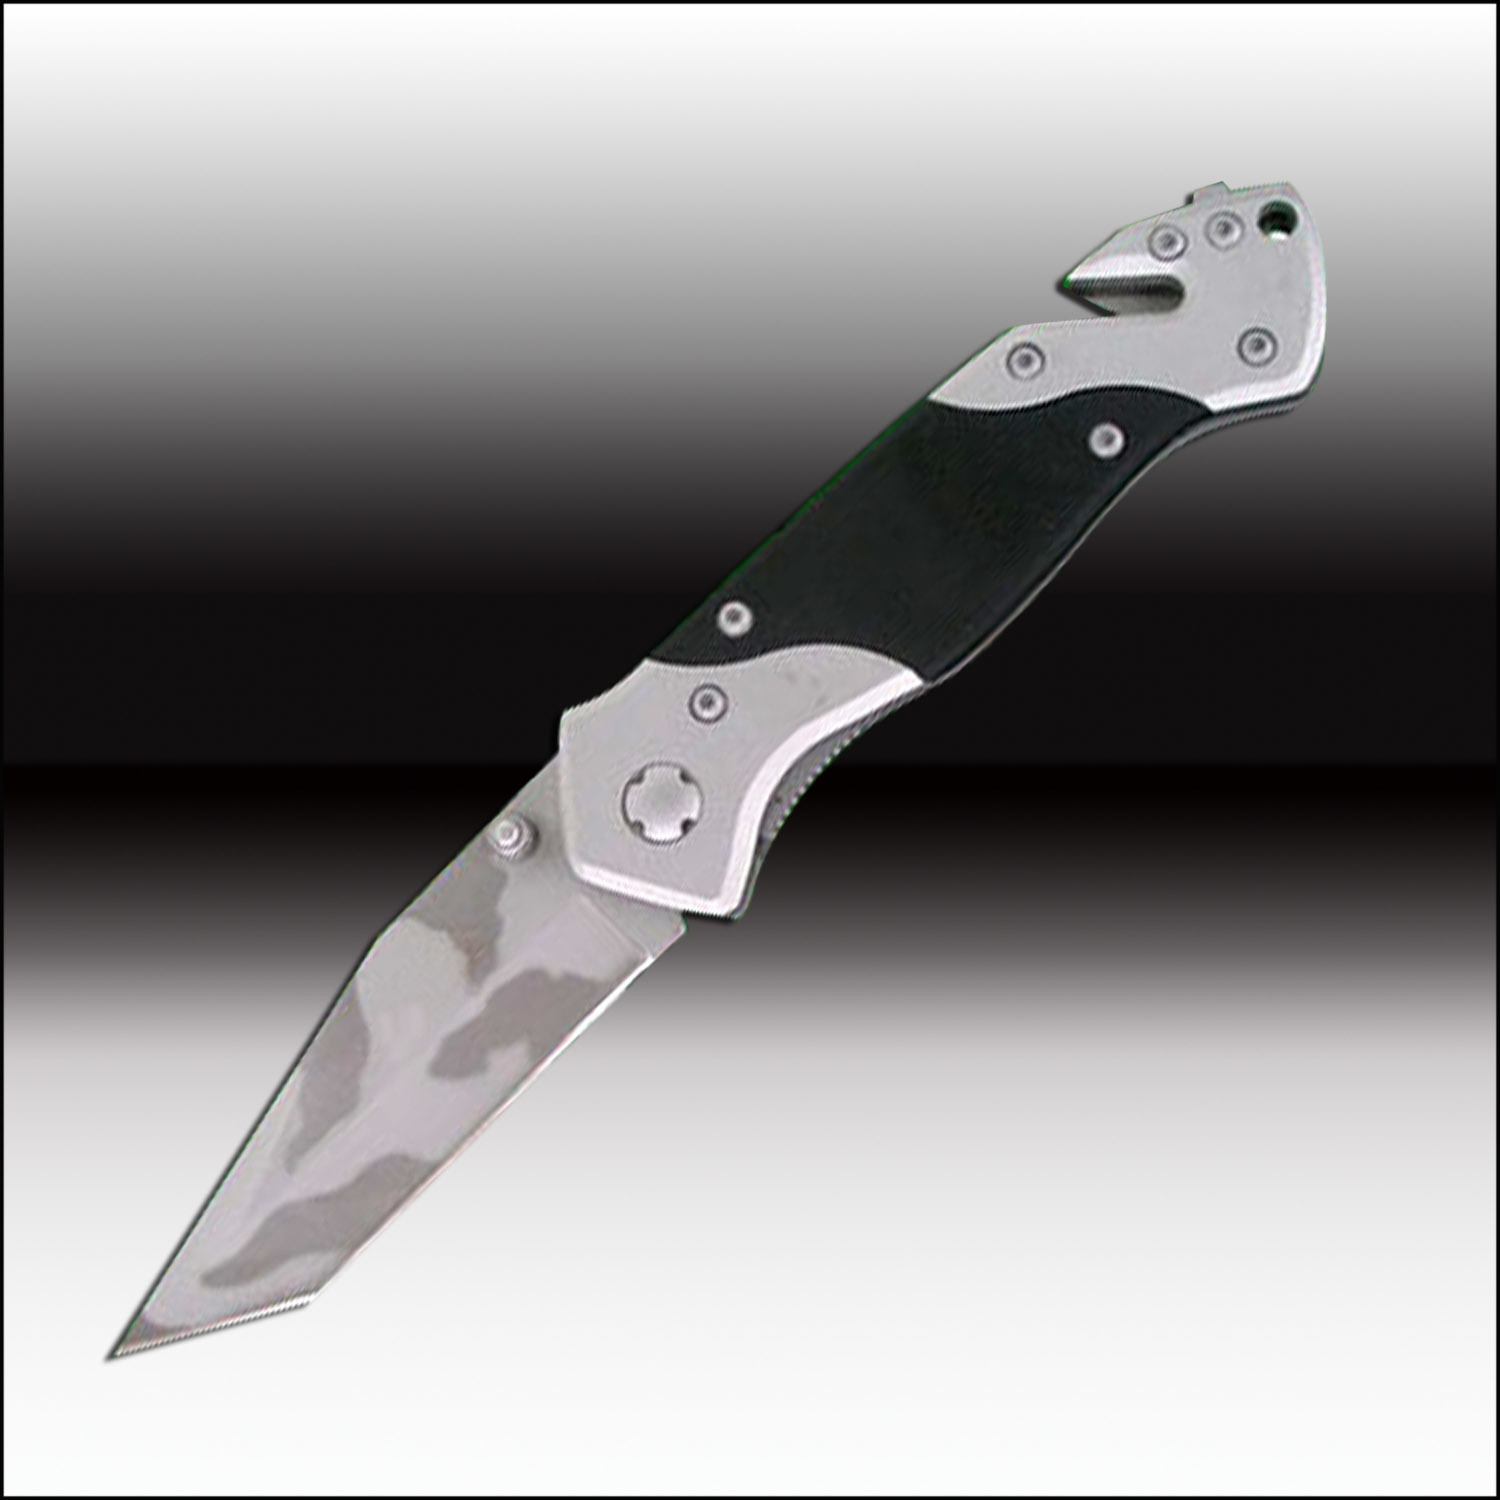 Tactics Knife Multi Function Knife with G10 Handle